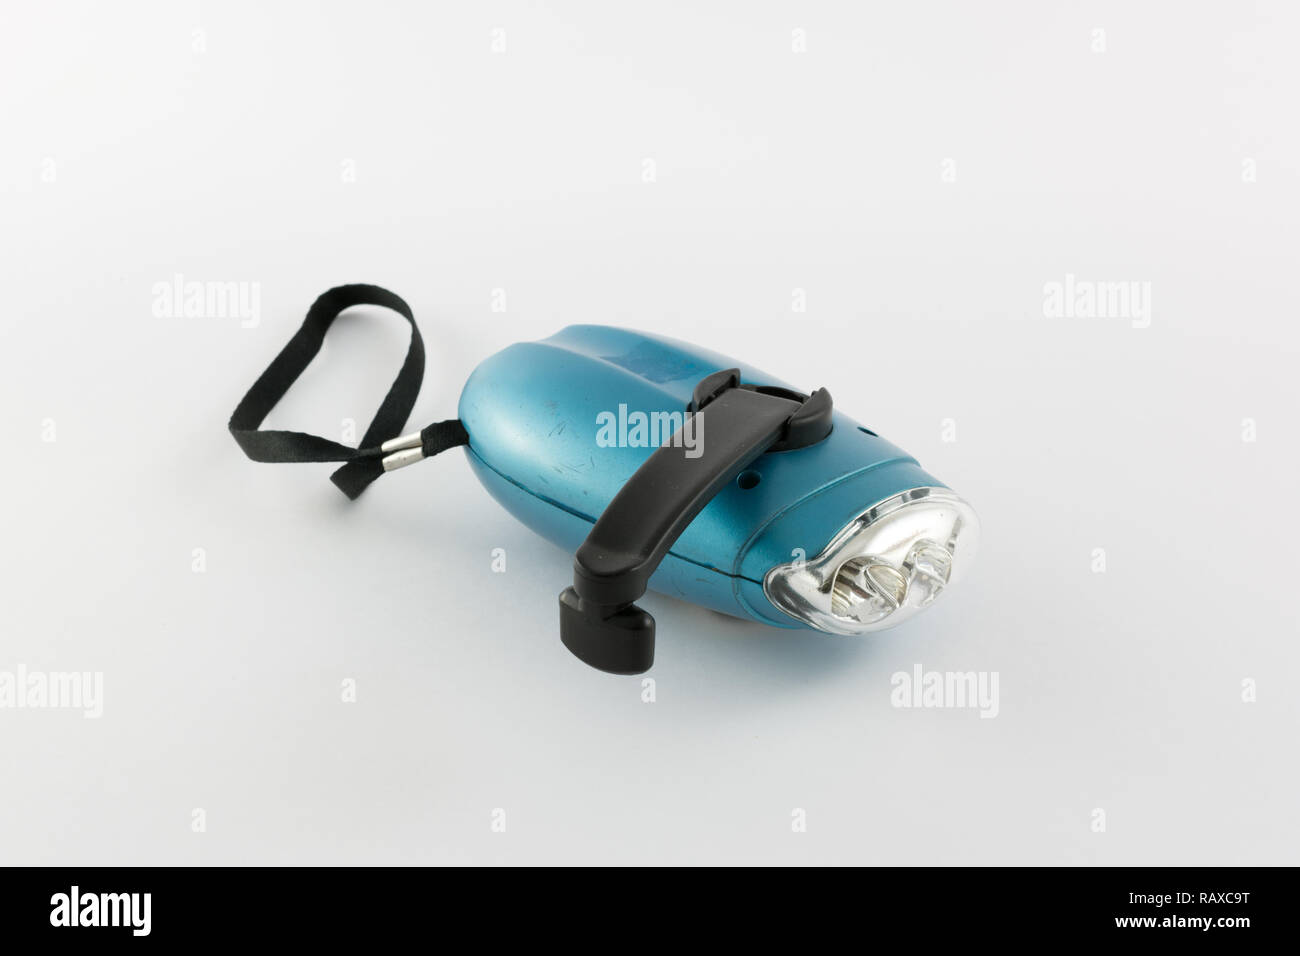 Wind up torch Stock Photo